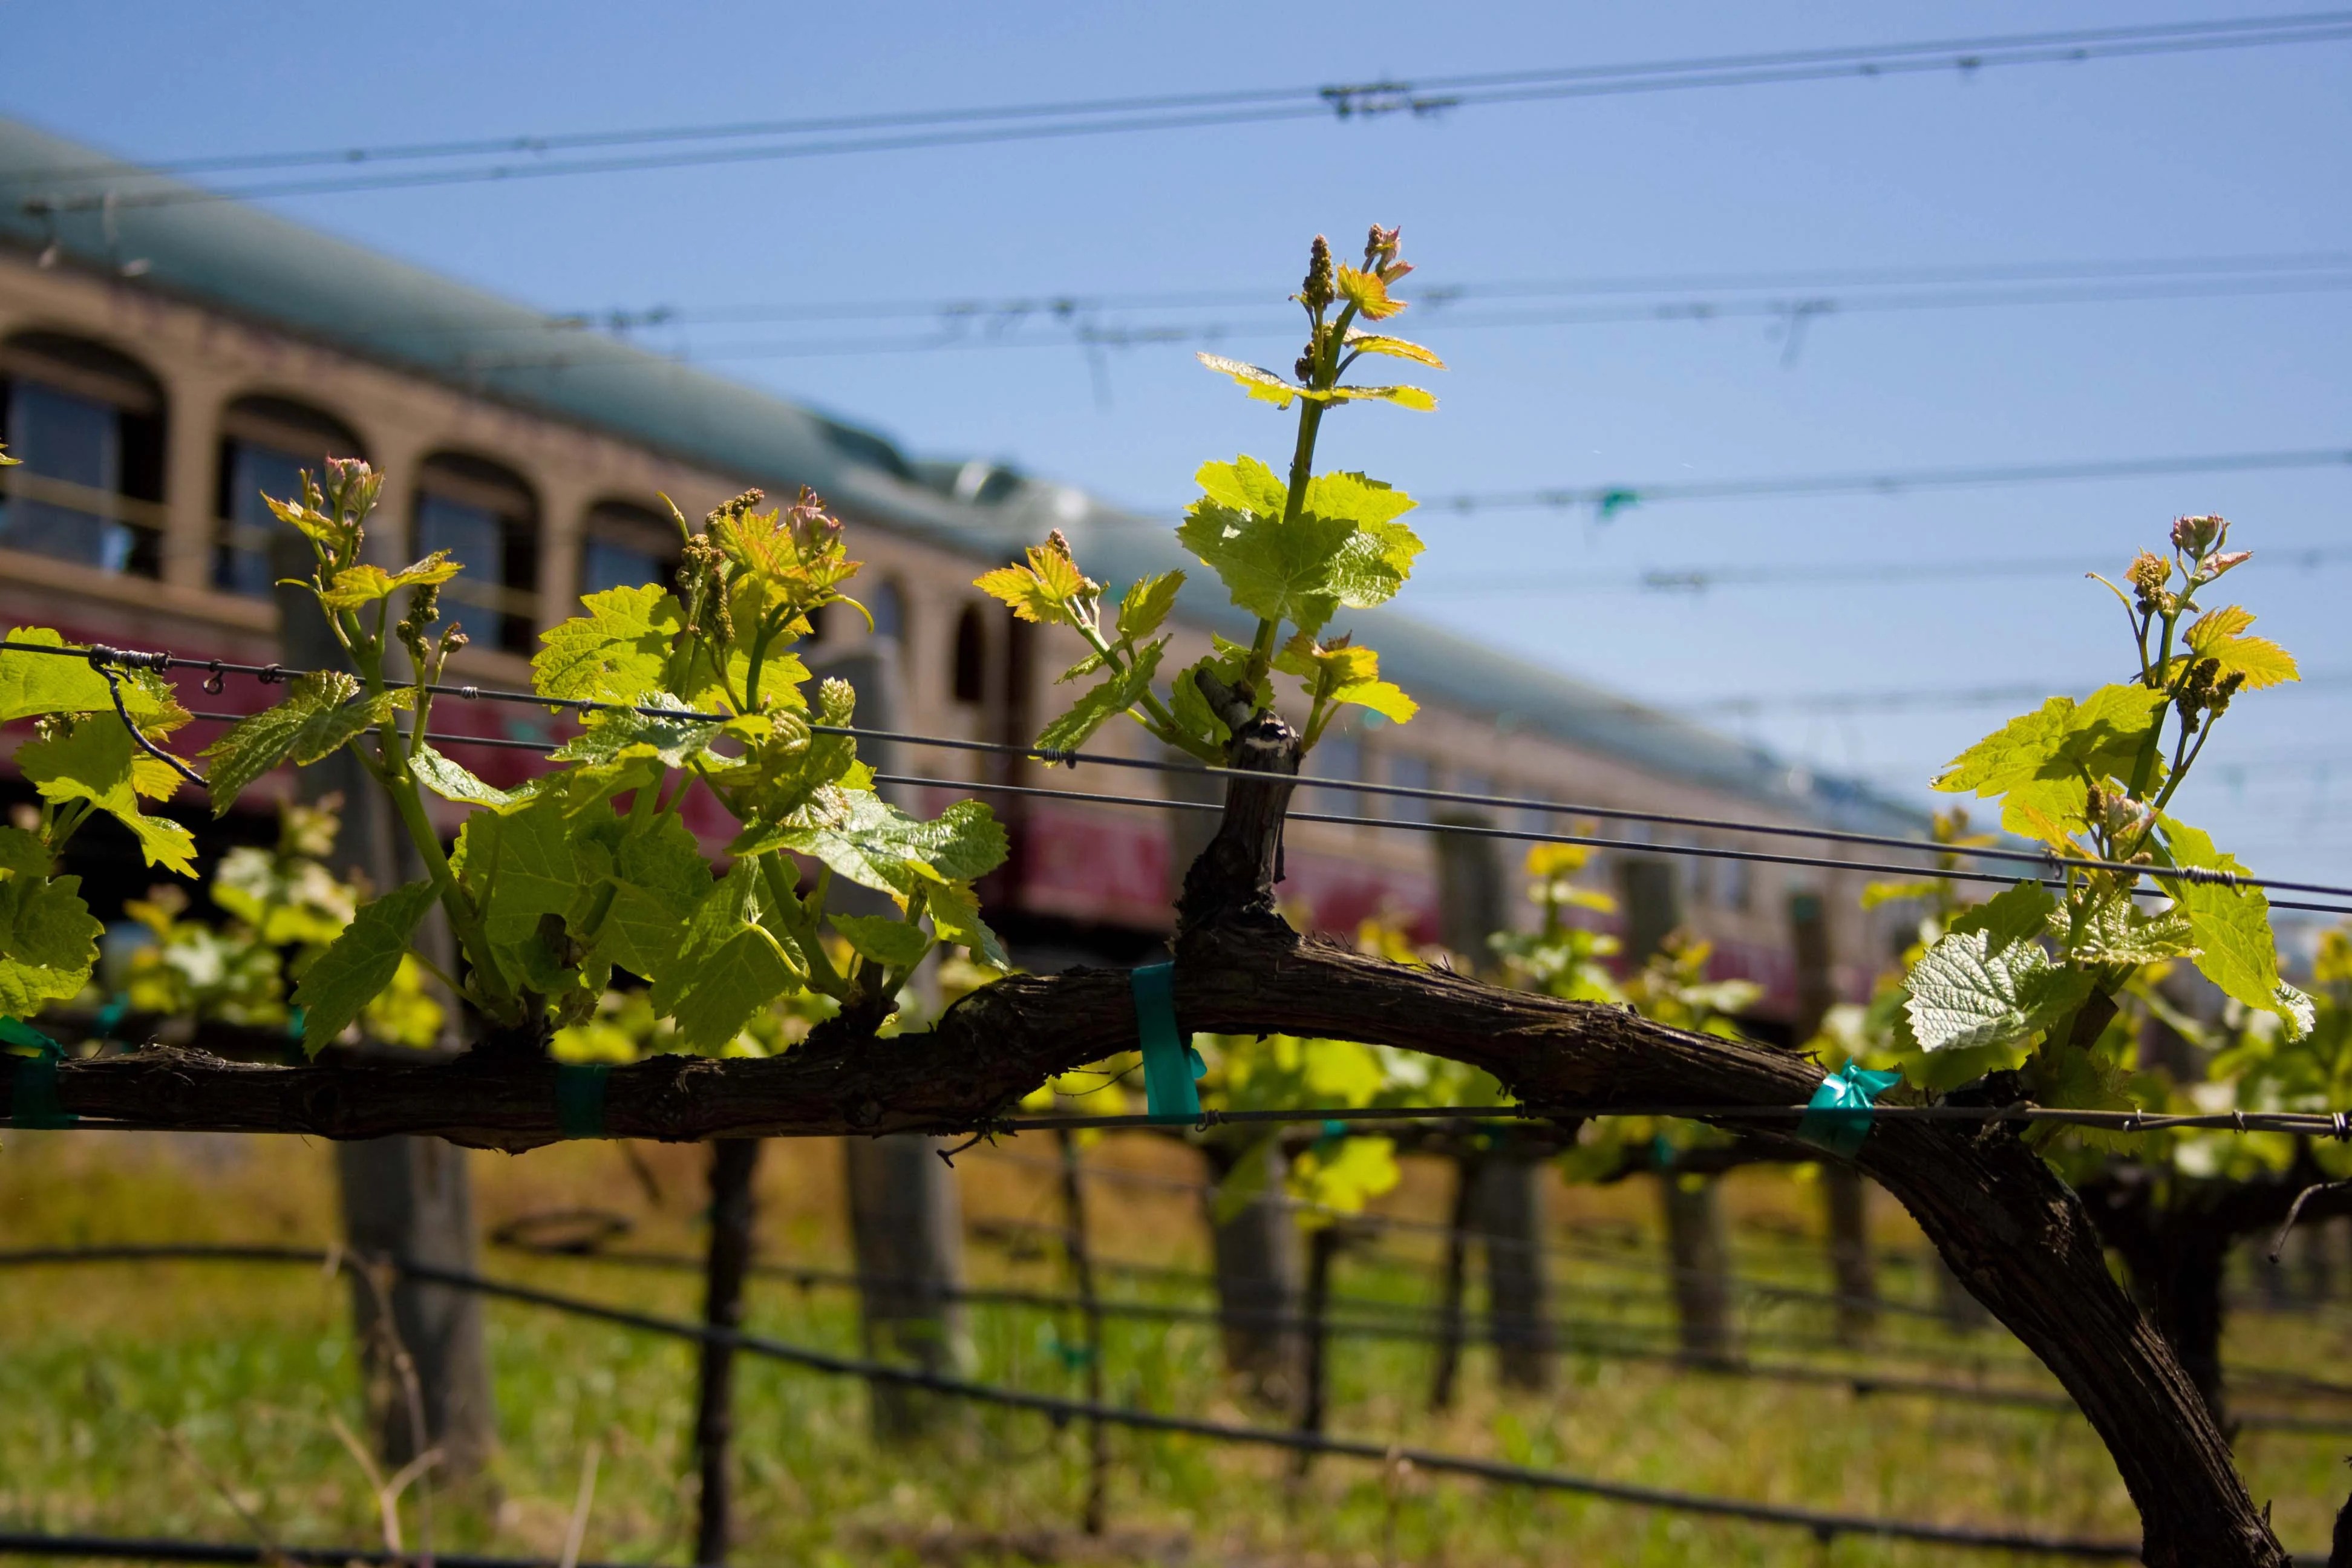 Grape buds on the vine with the Napa Valley Wine Train in the background.